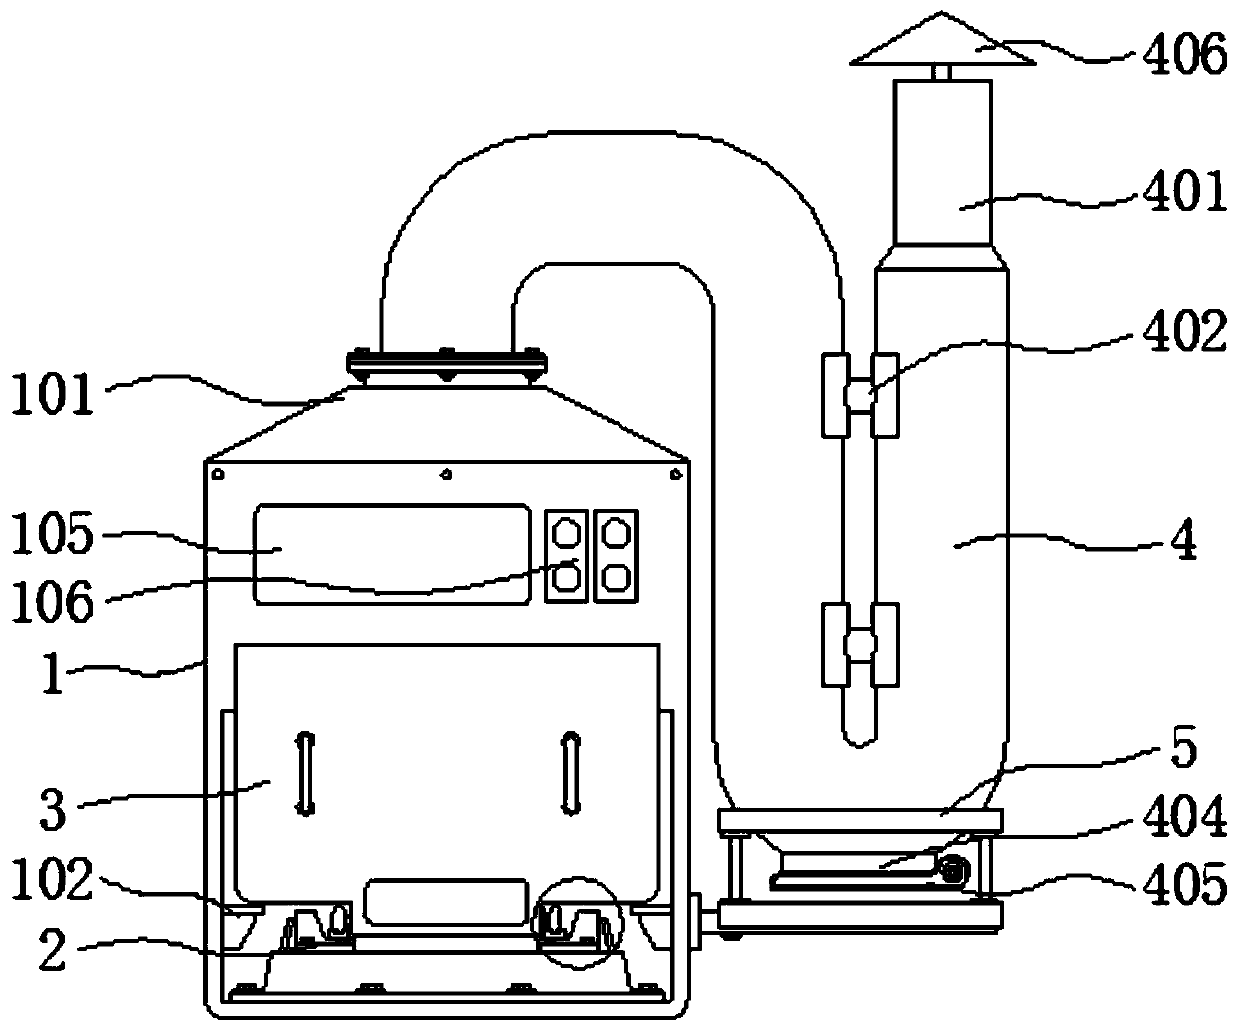 An environment-friendly waste incineration treatment device with waste gas treatment function